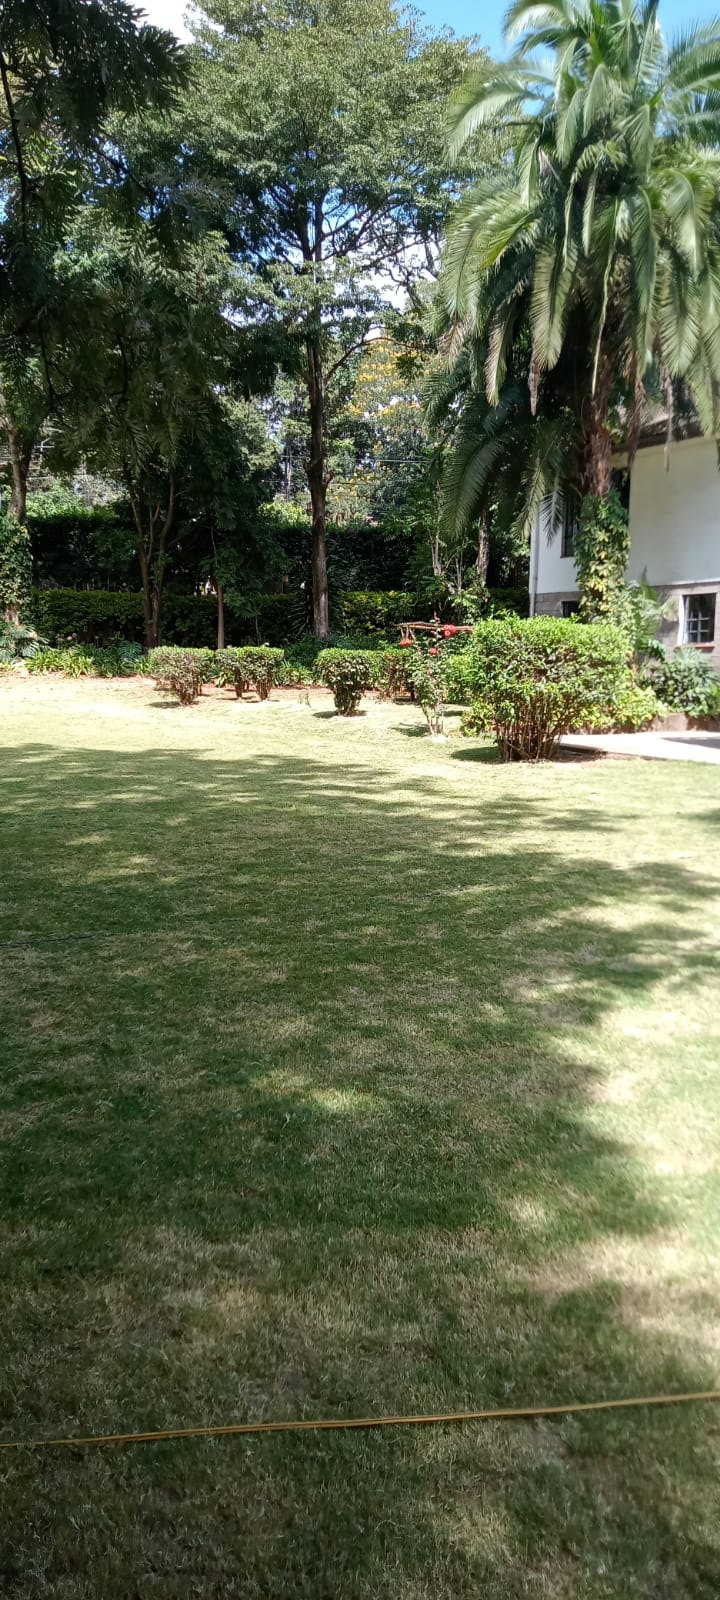 4 Bedroom Double Storey House to Let at Ksh600k Sitting on 34acres with Huge Family Room, Tv Room, Study Room, Terrace, Mature and Well-Kept Garden and more amenities (16)